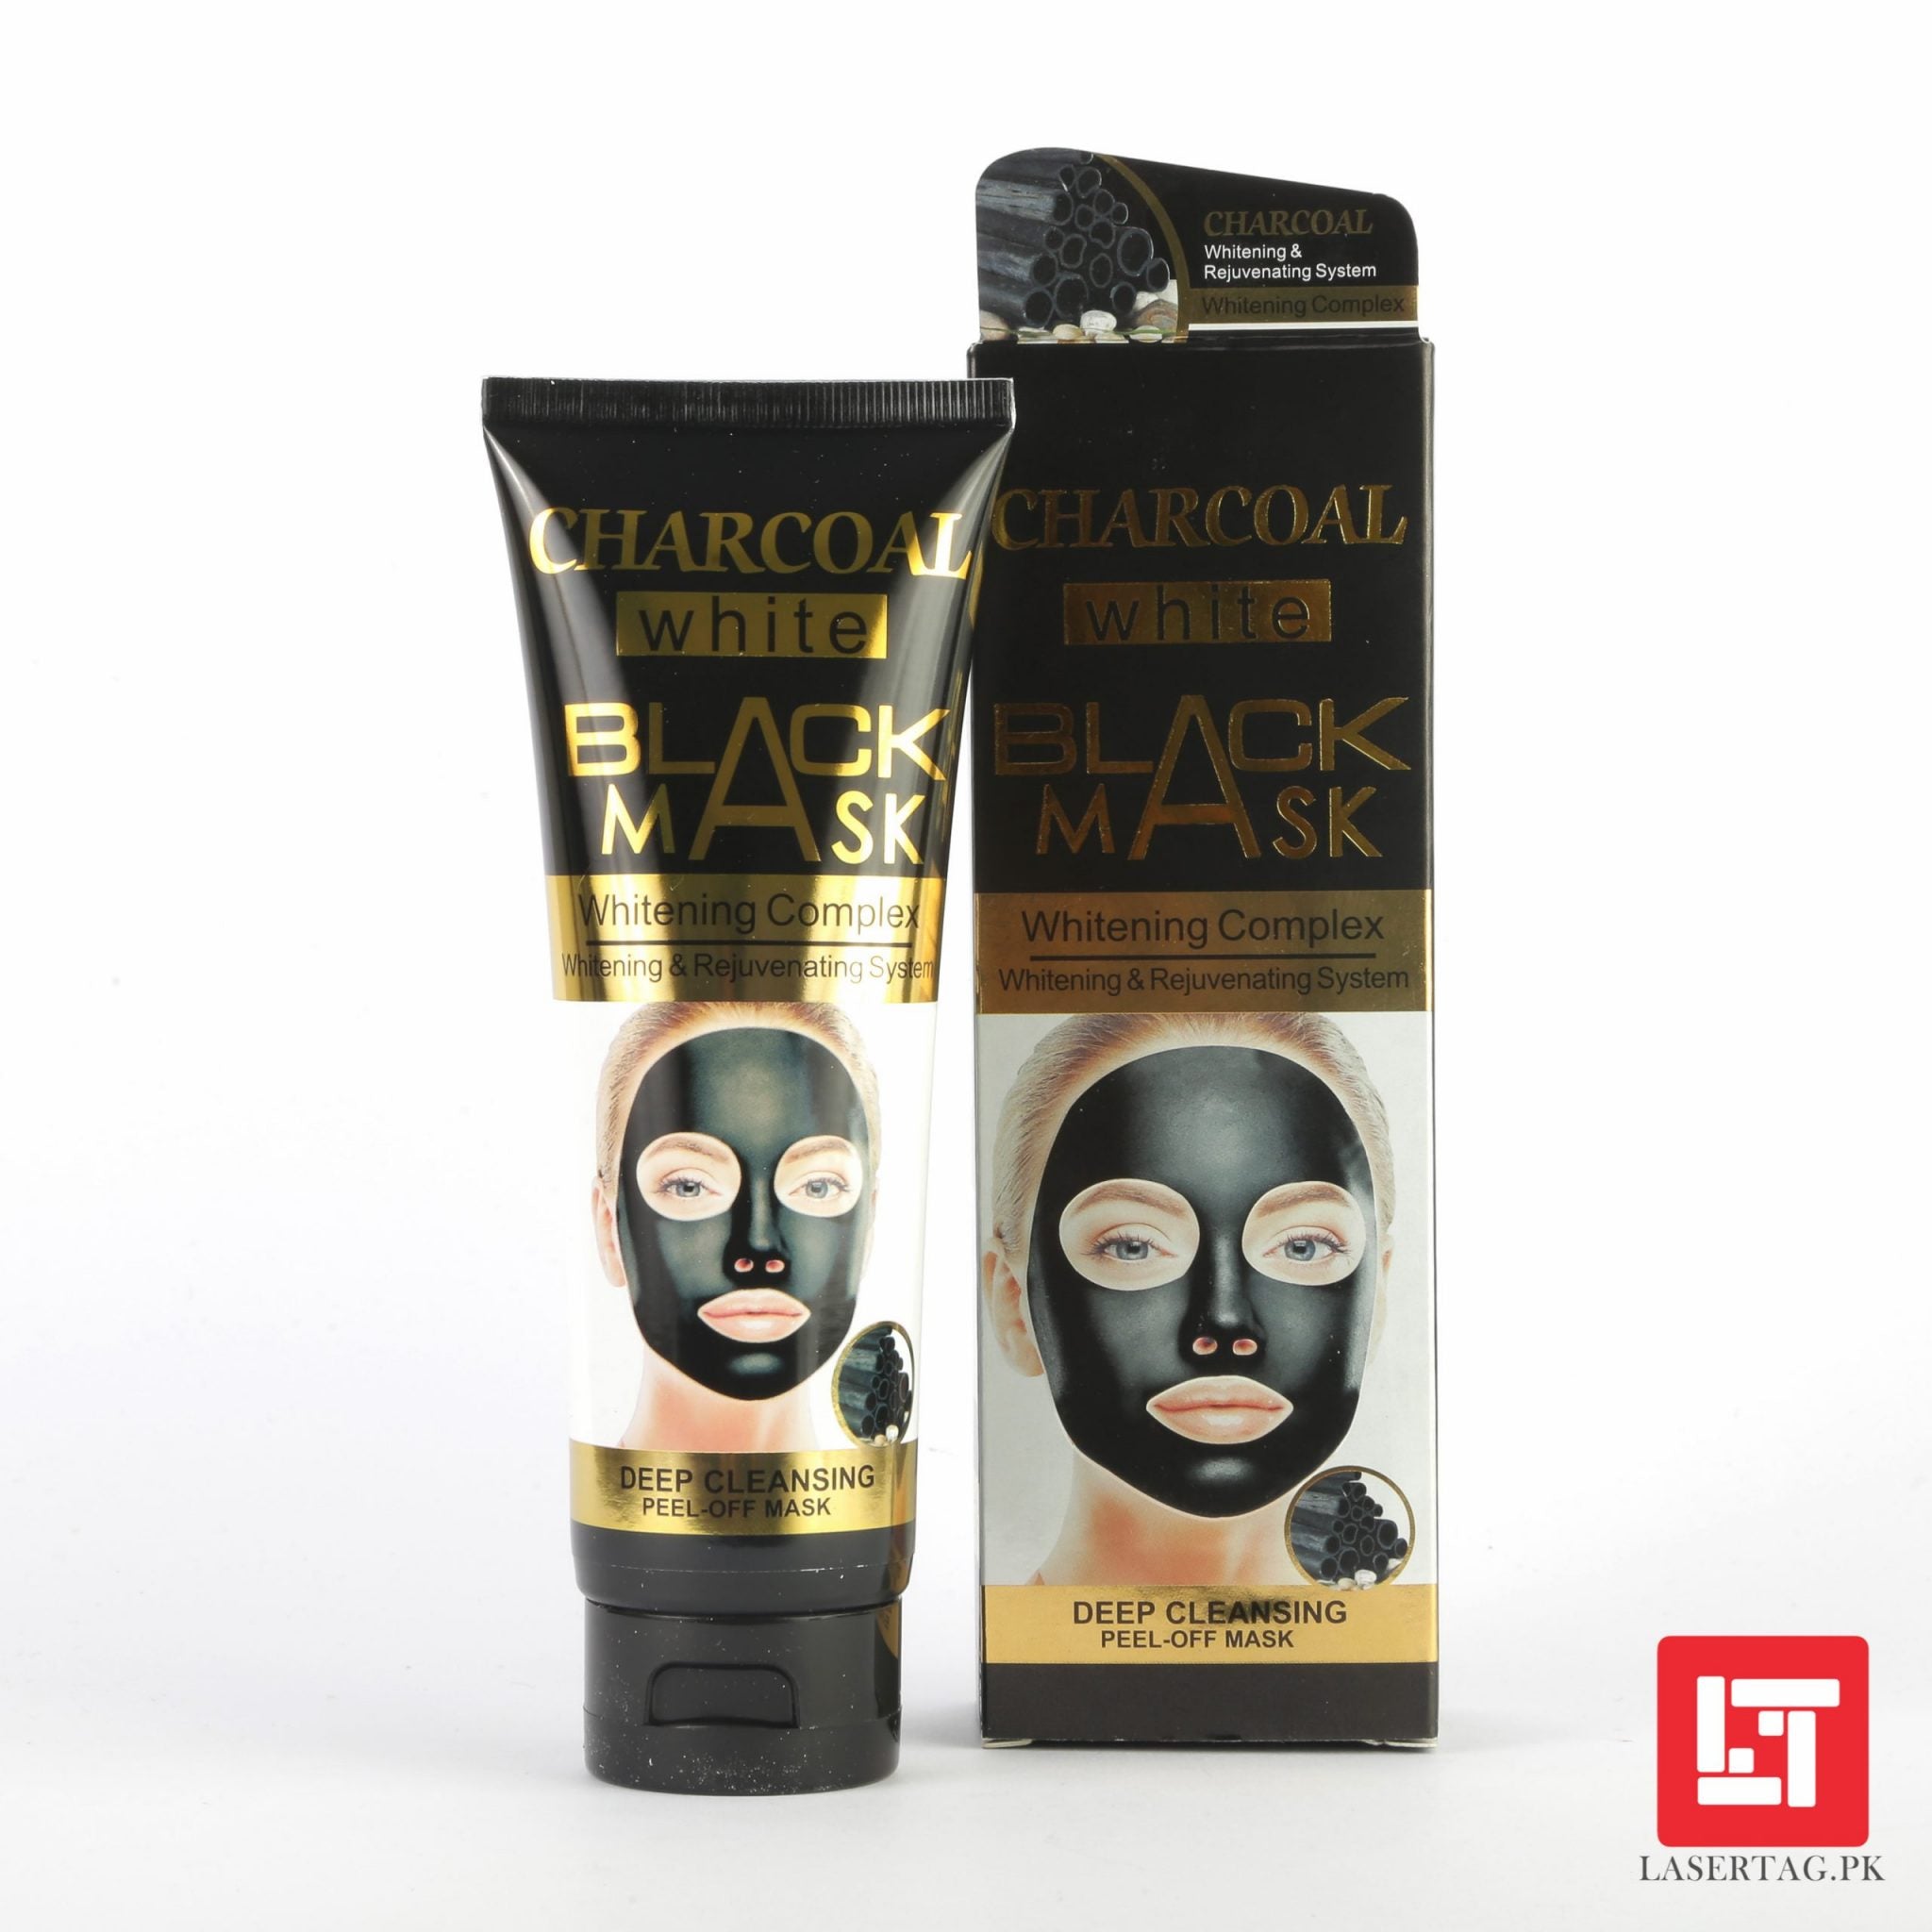 Wokali Charcoal Black Mask Whitening Complex Deep Cleansing Peel Off M 